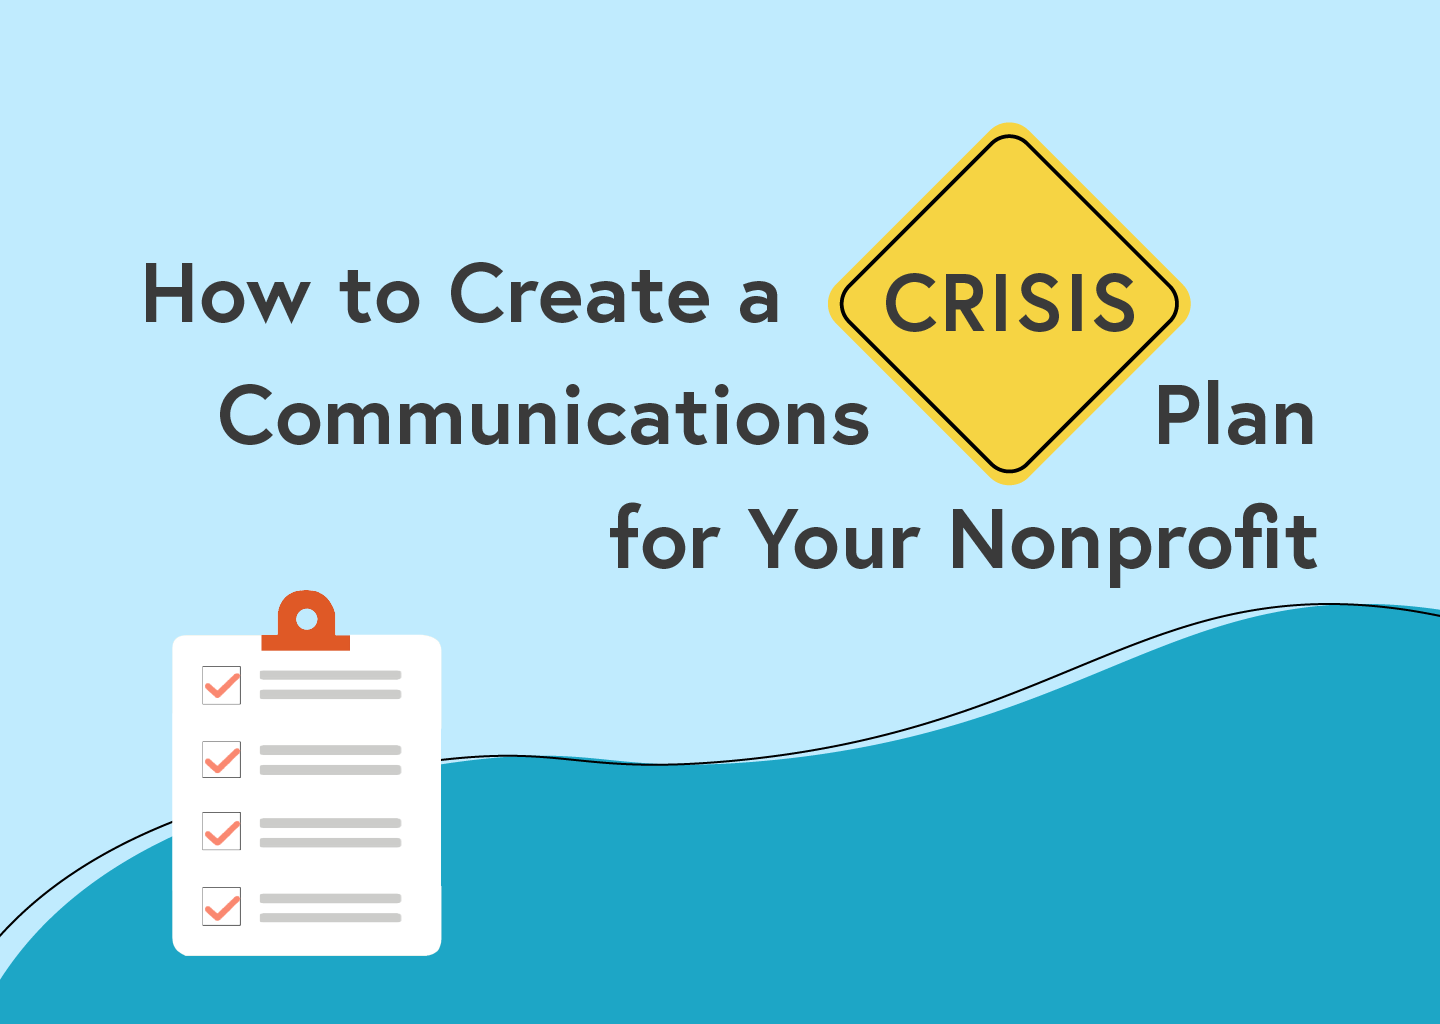 How to Create a Crisis Communications Plan for Your Nonprofit